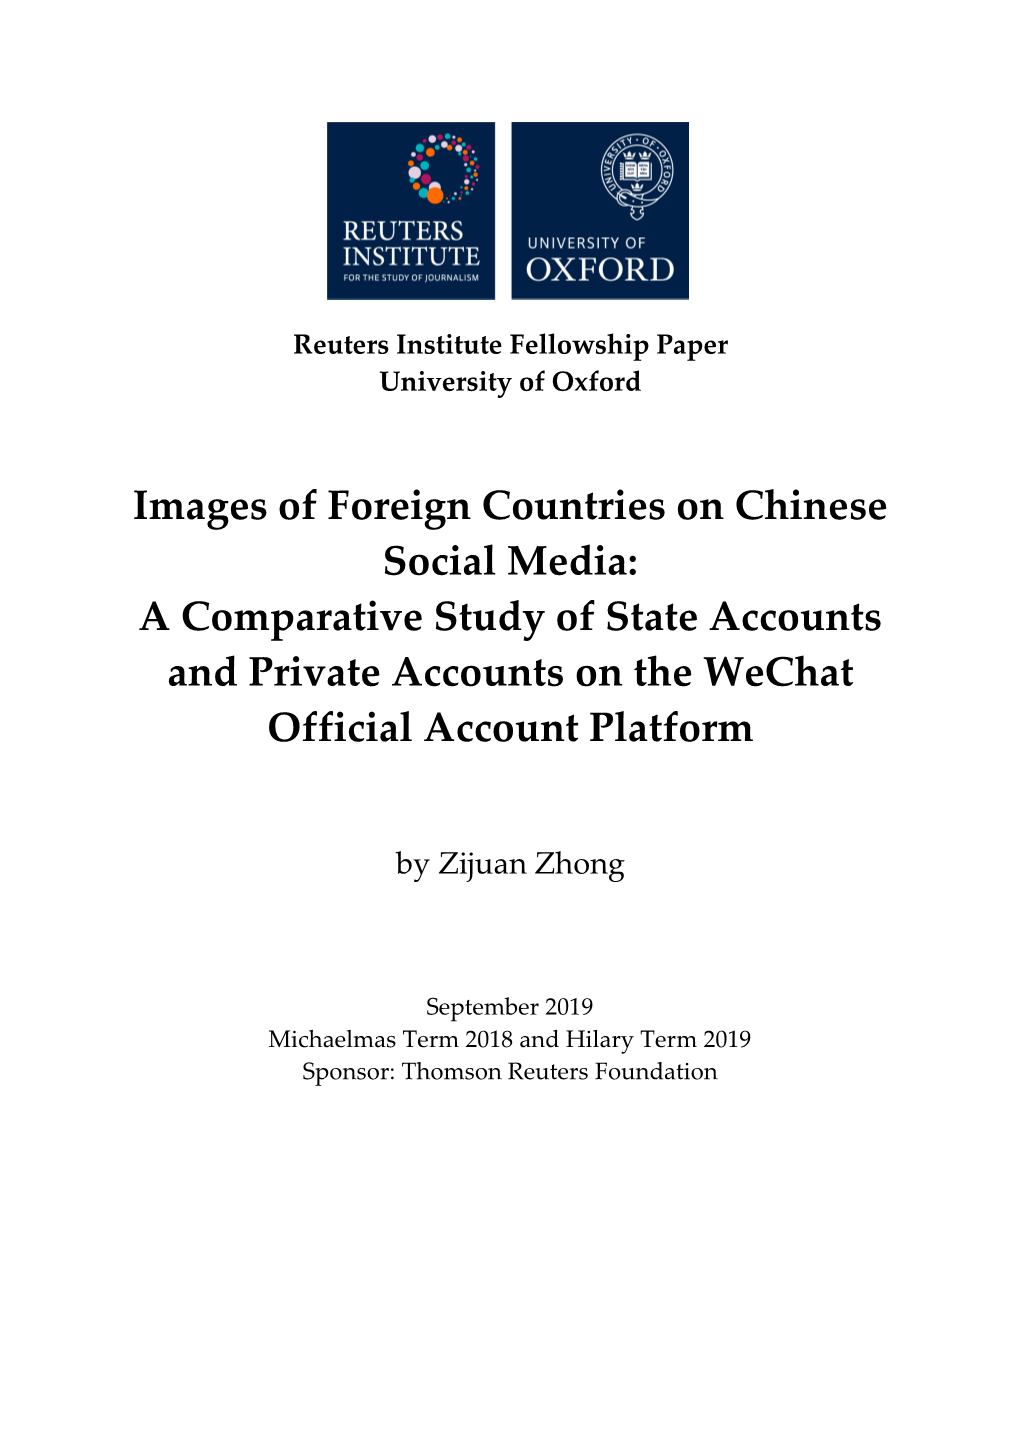 Images of Foreign Countries on Chinese Social Media: a Comparative Study of State Accounts and Private Accounts on the Wechat Official Account Platform